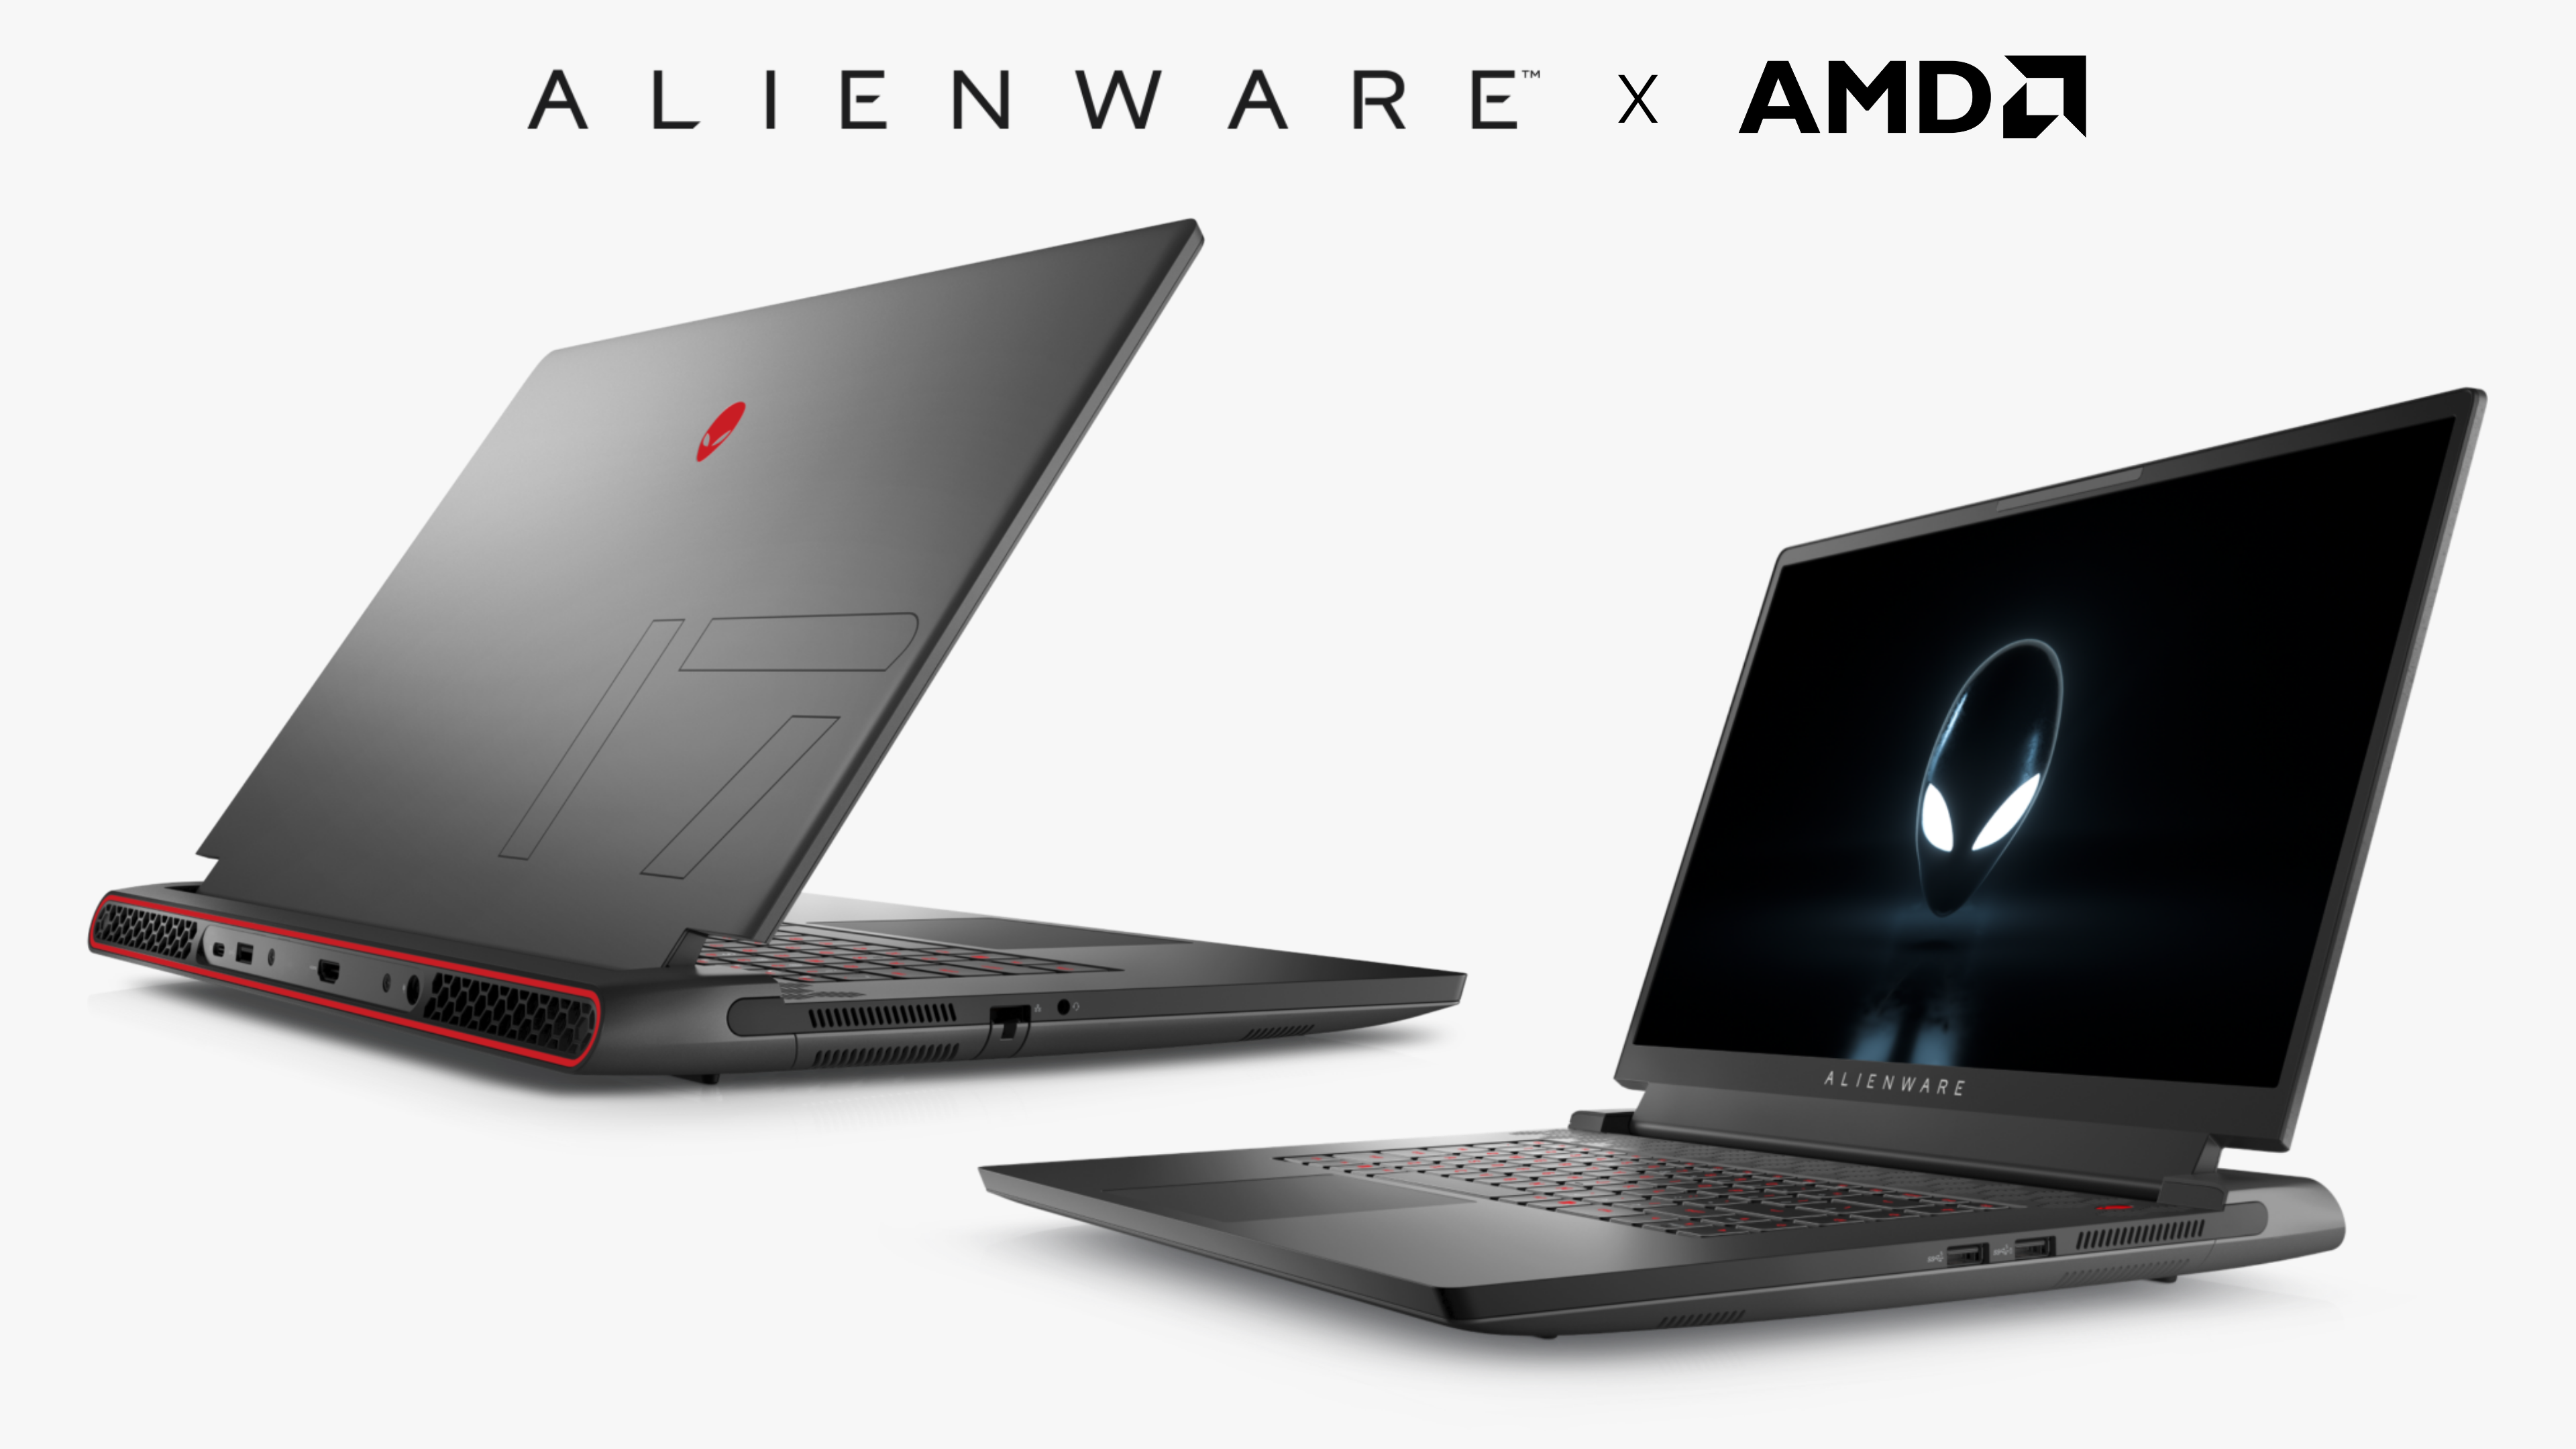 Alienware m17 R5 is The World's Fastest 17" Laptop With Ryzen 9 6980HX and RTX 3080 Ti/RX 6850M XT GPU - Appuals.com